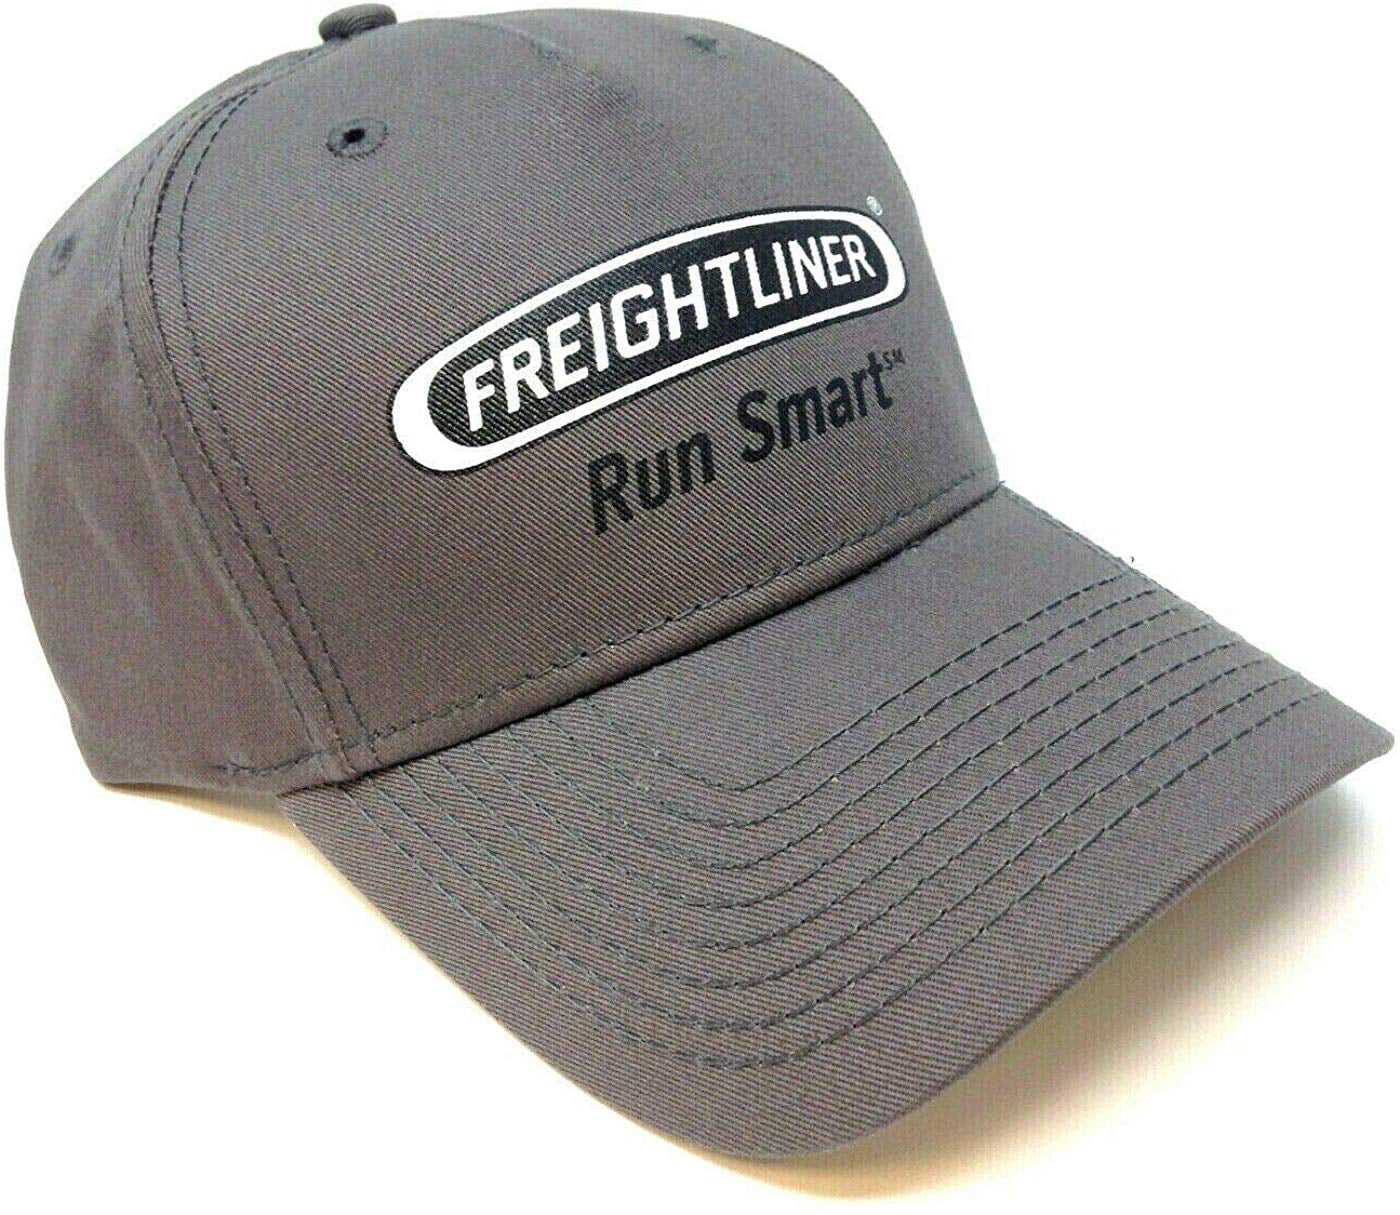 Freightliner Trucks Unstructured Contrast Red & White Mesh Cap 